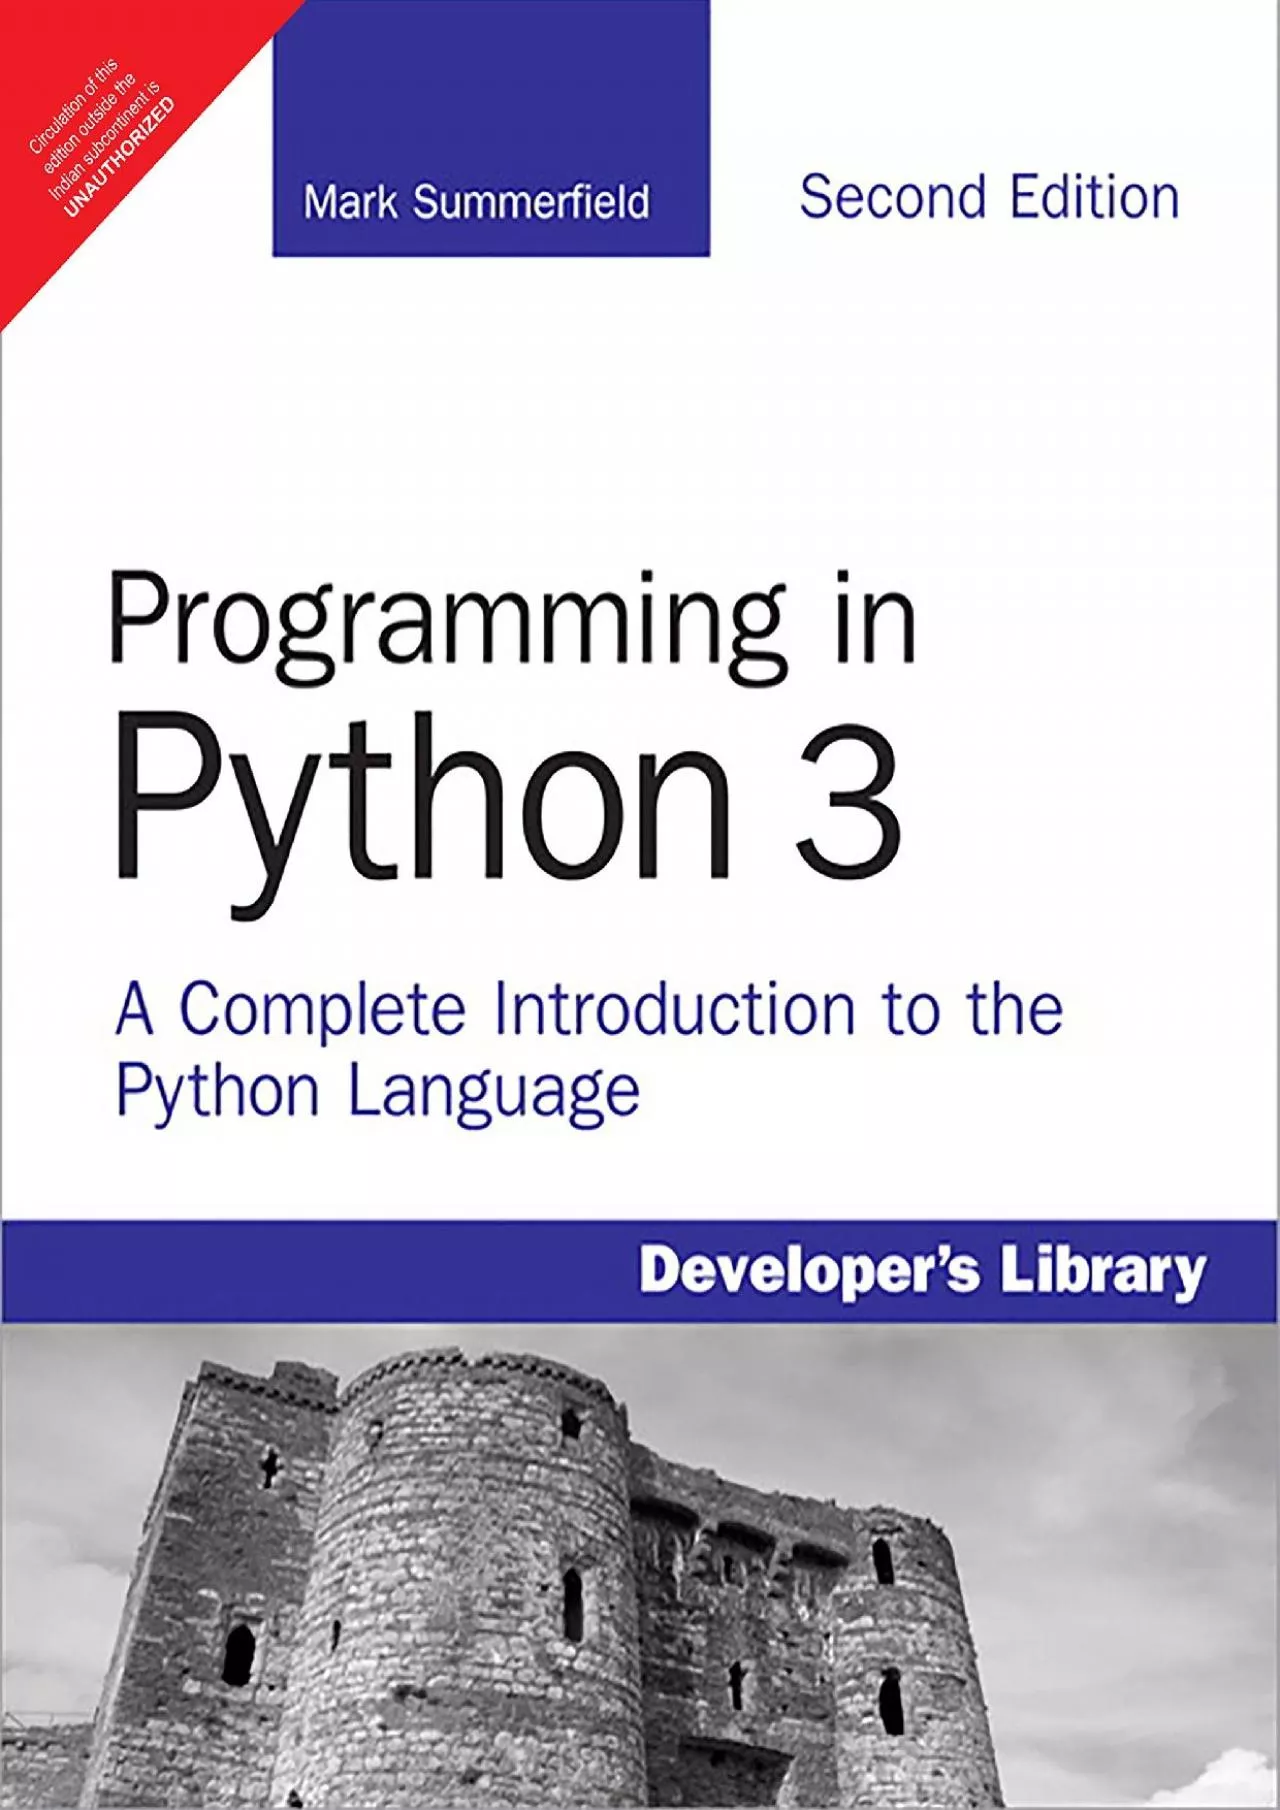 [READING BOOK]-Programming In Python 3: A Complete Introduction To The Python Language,